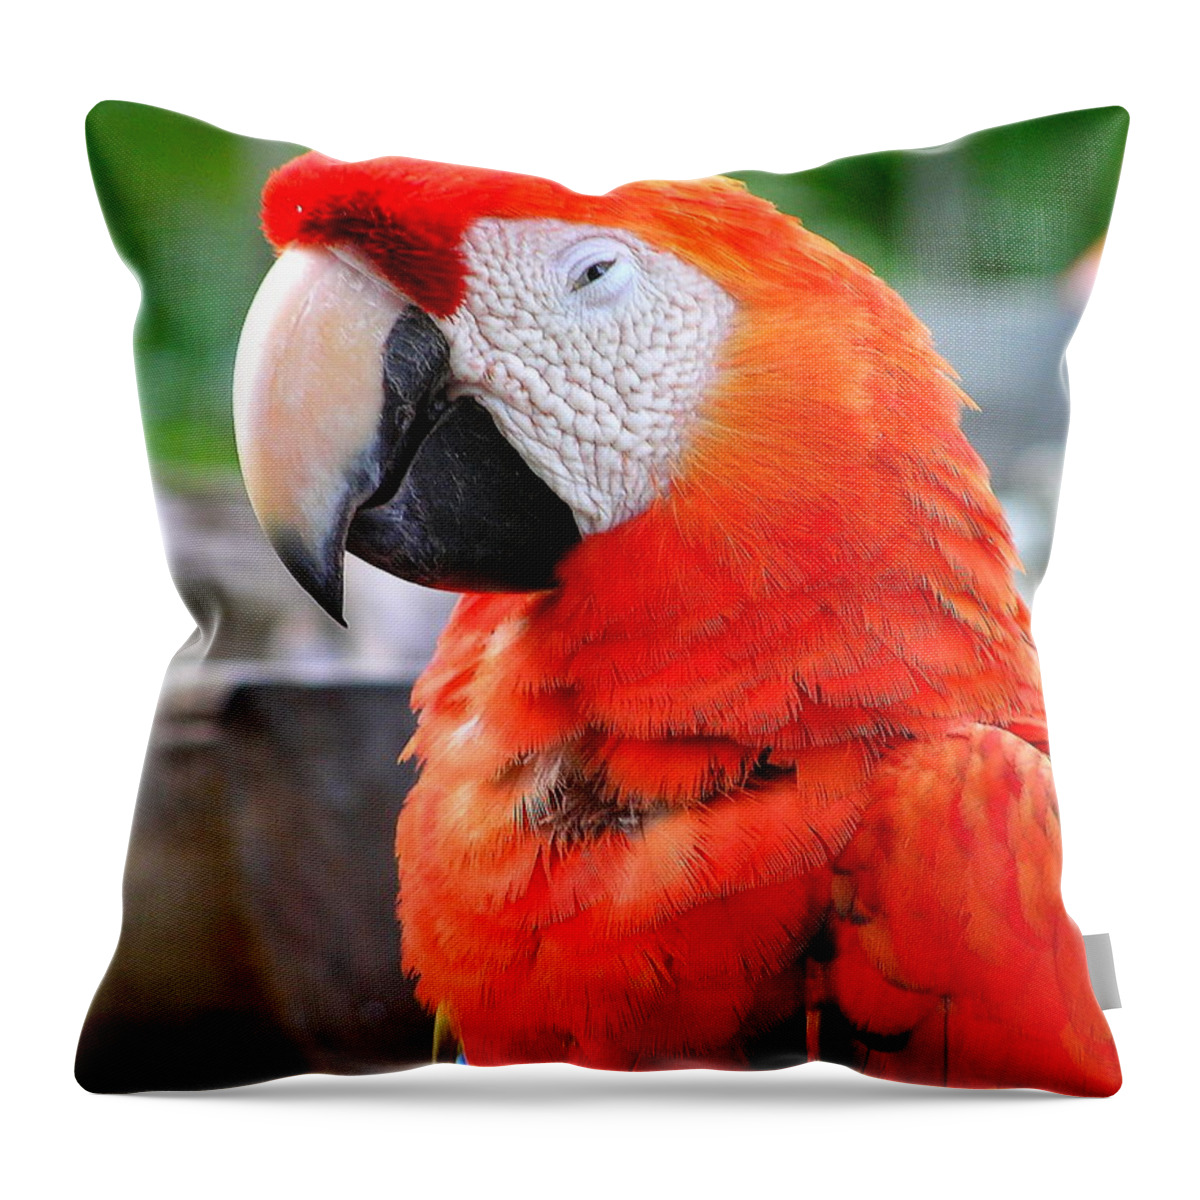 Parrot Throw Pillow featuring the photograph Parrot by Pat Moore